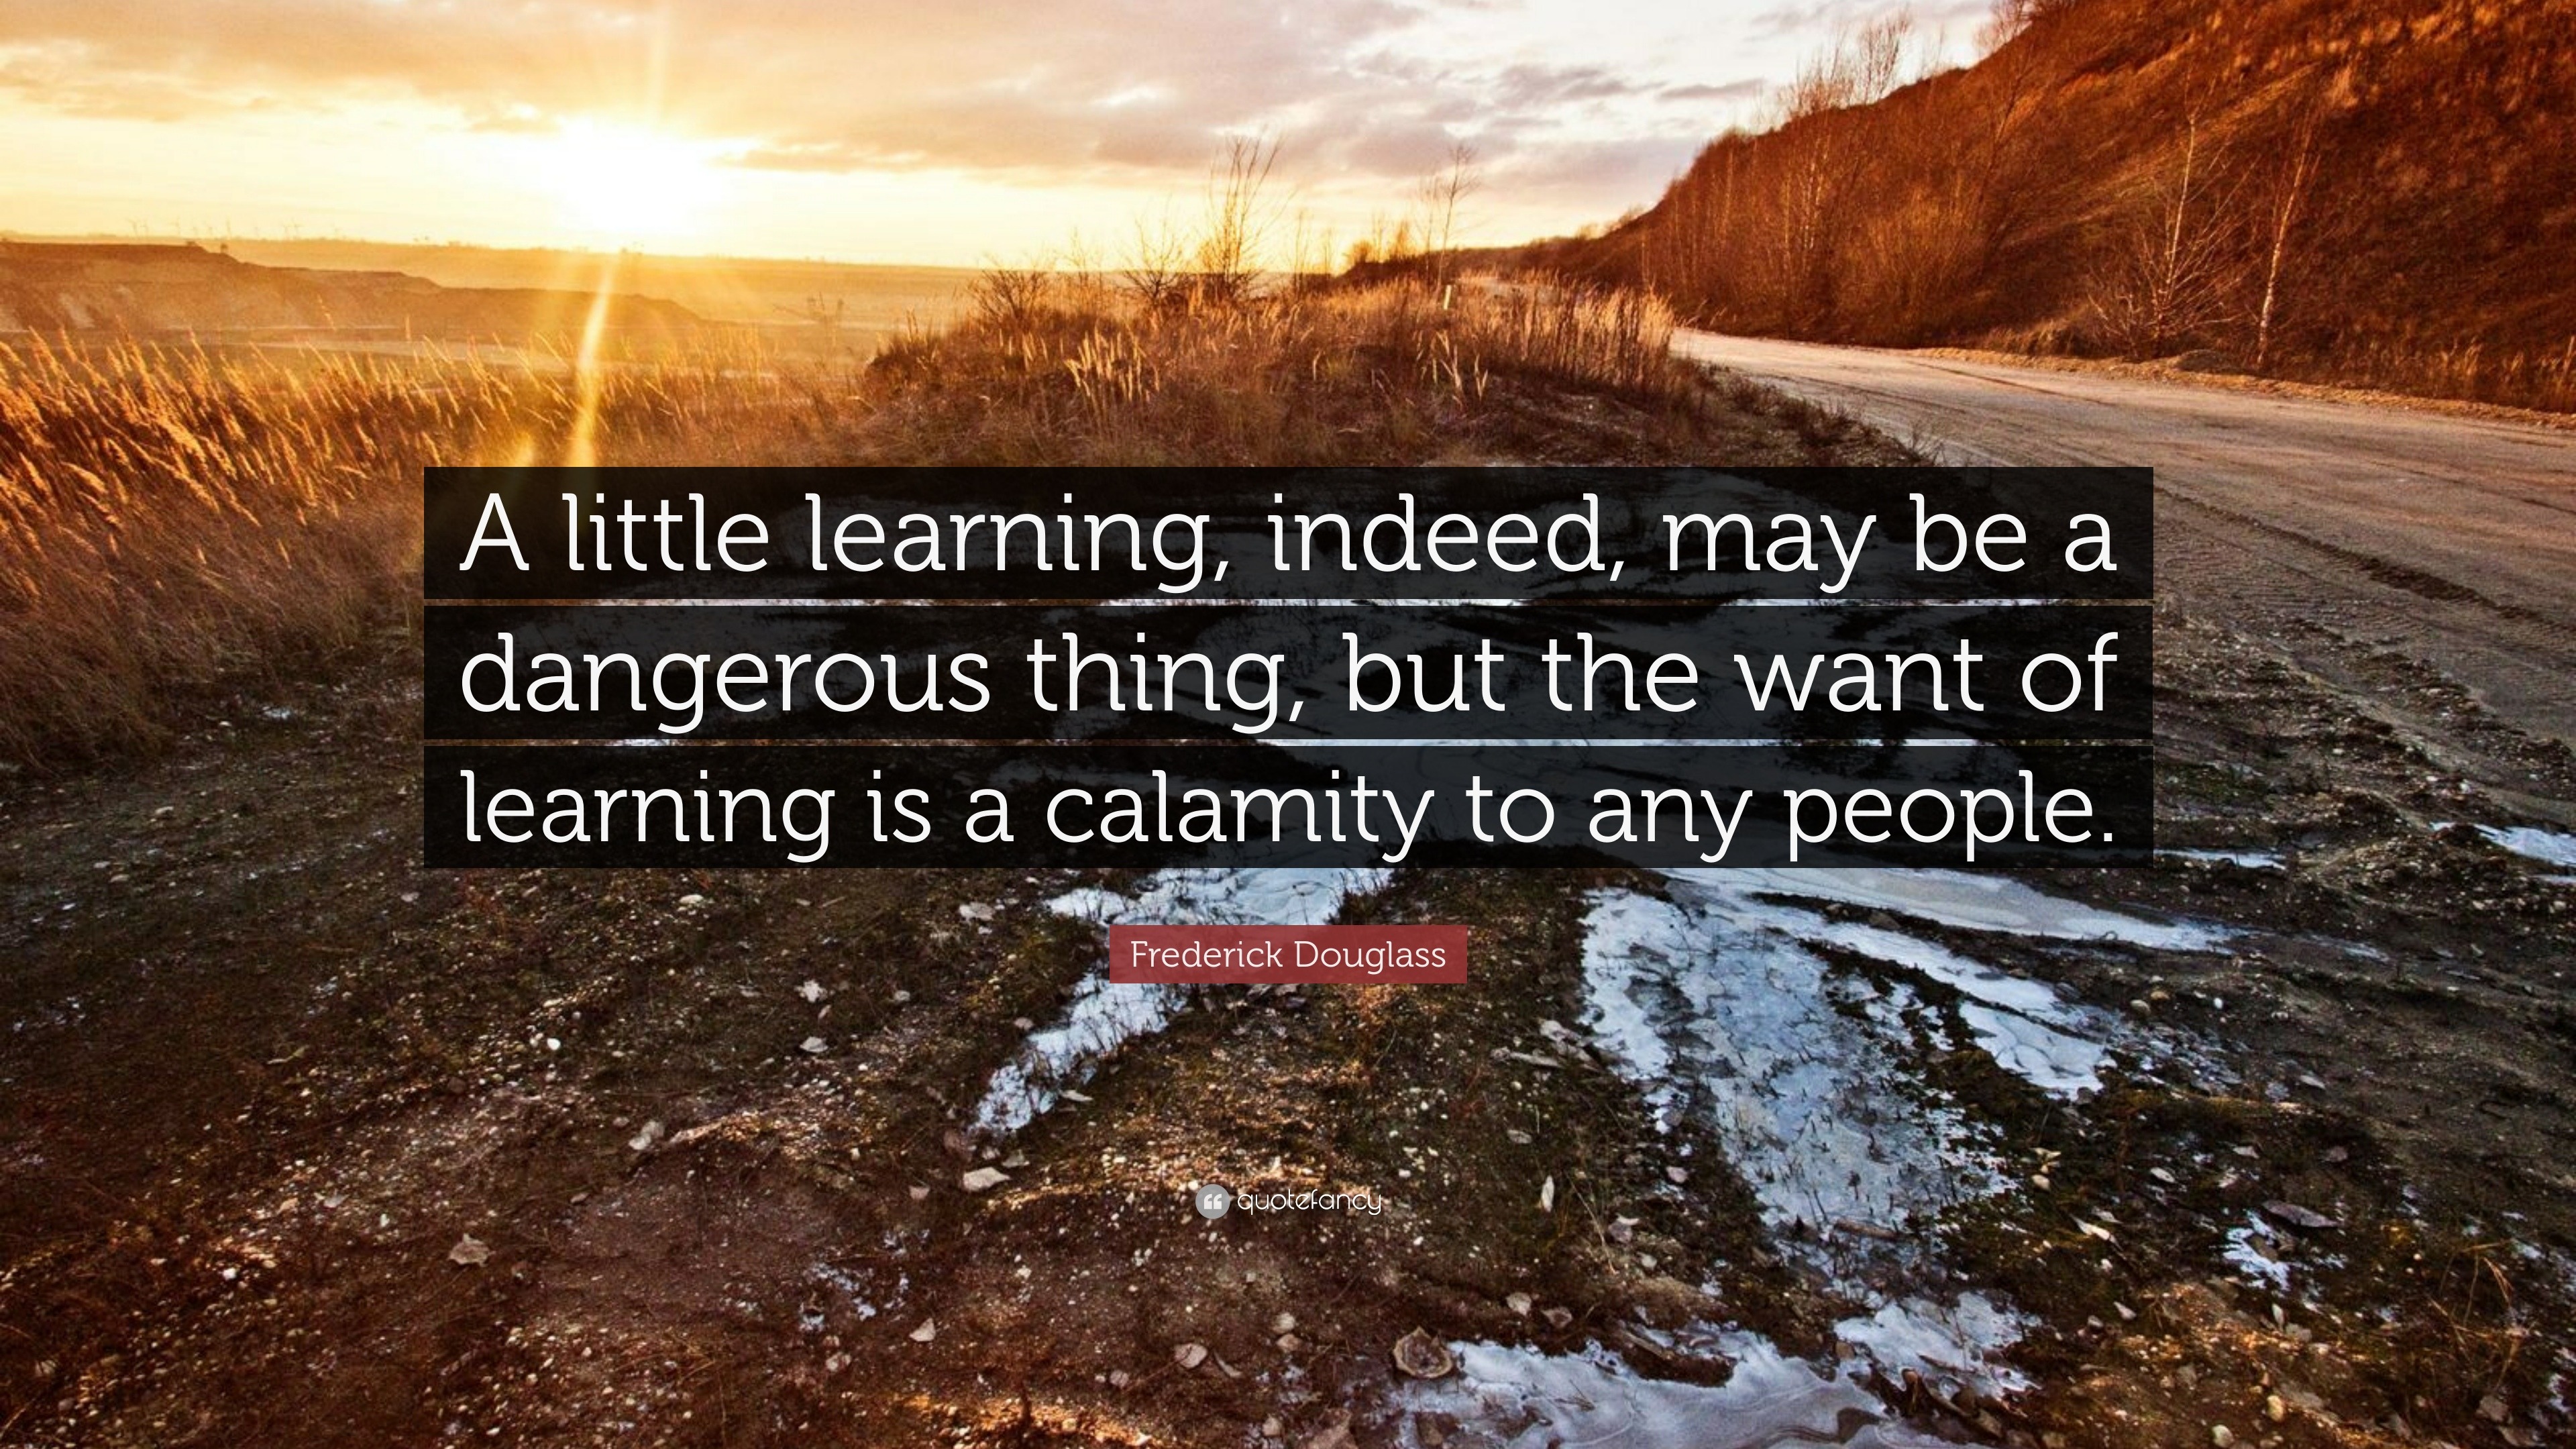 Short essay on A Little Learning is a Dangerous Thing